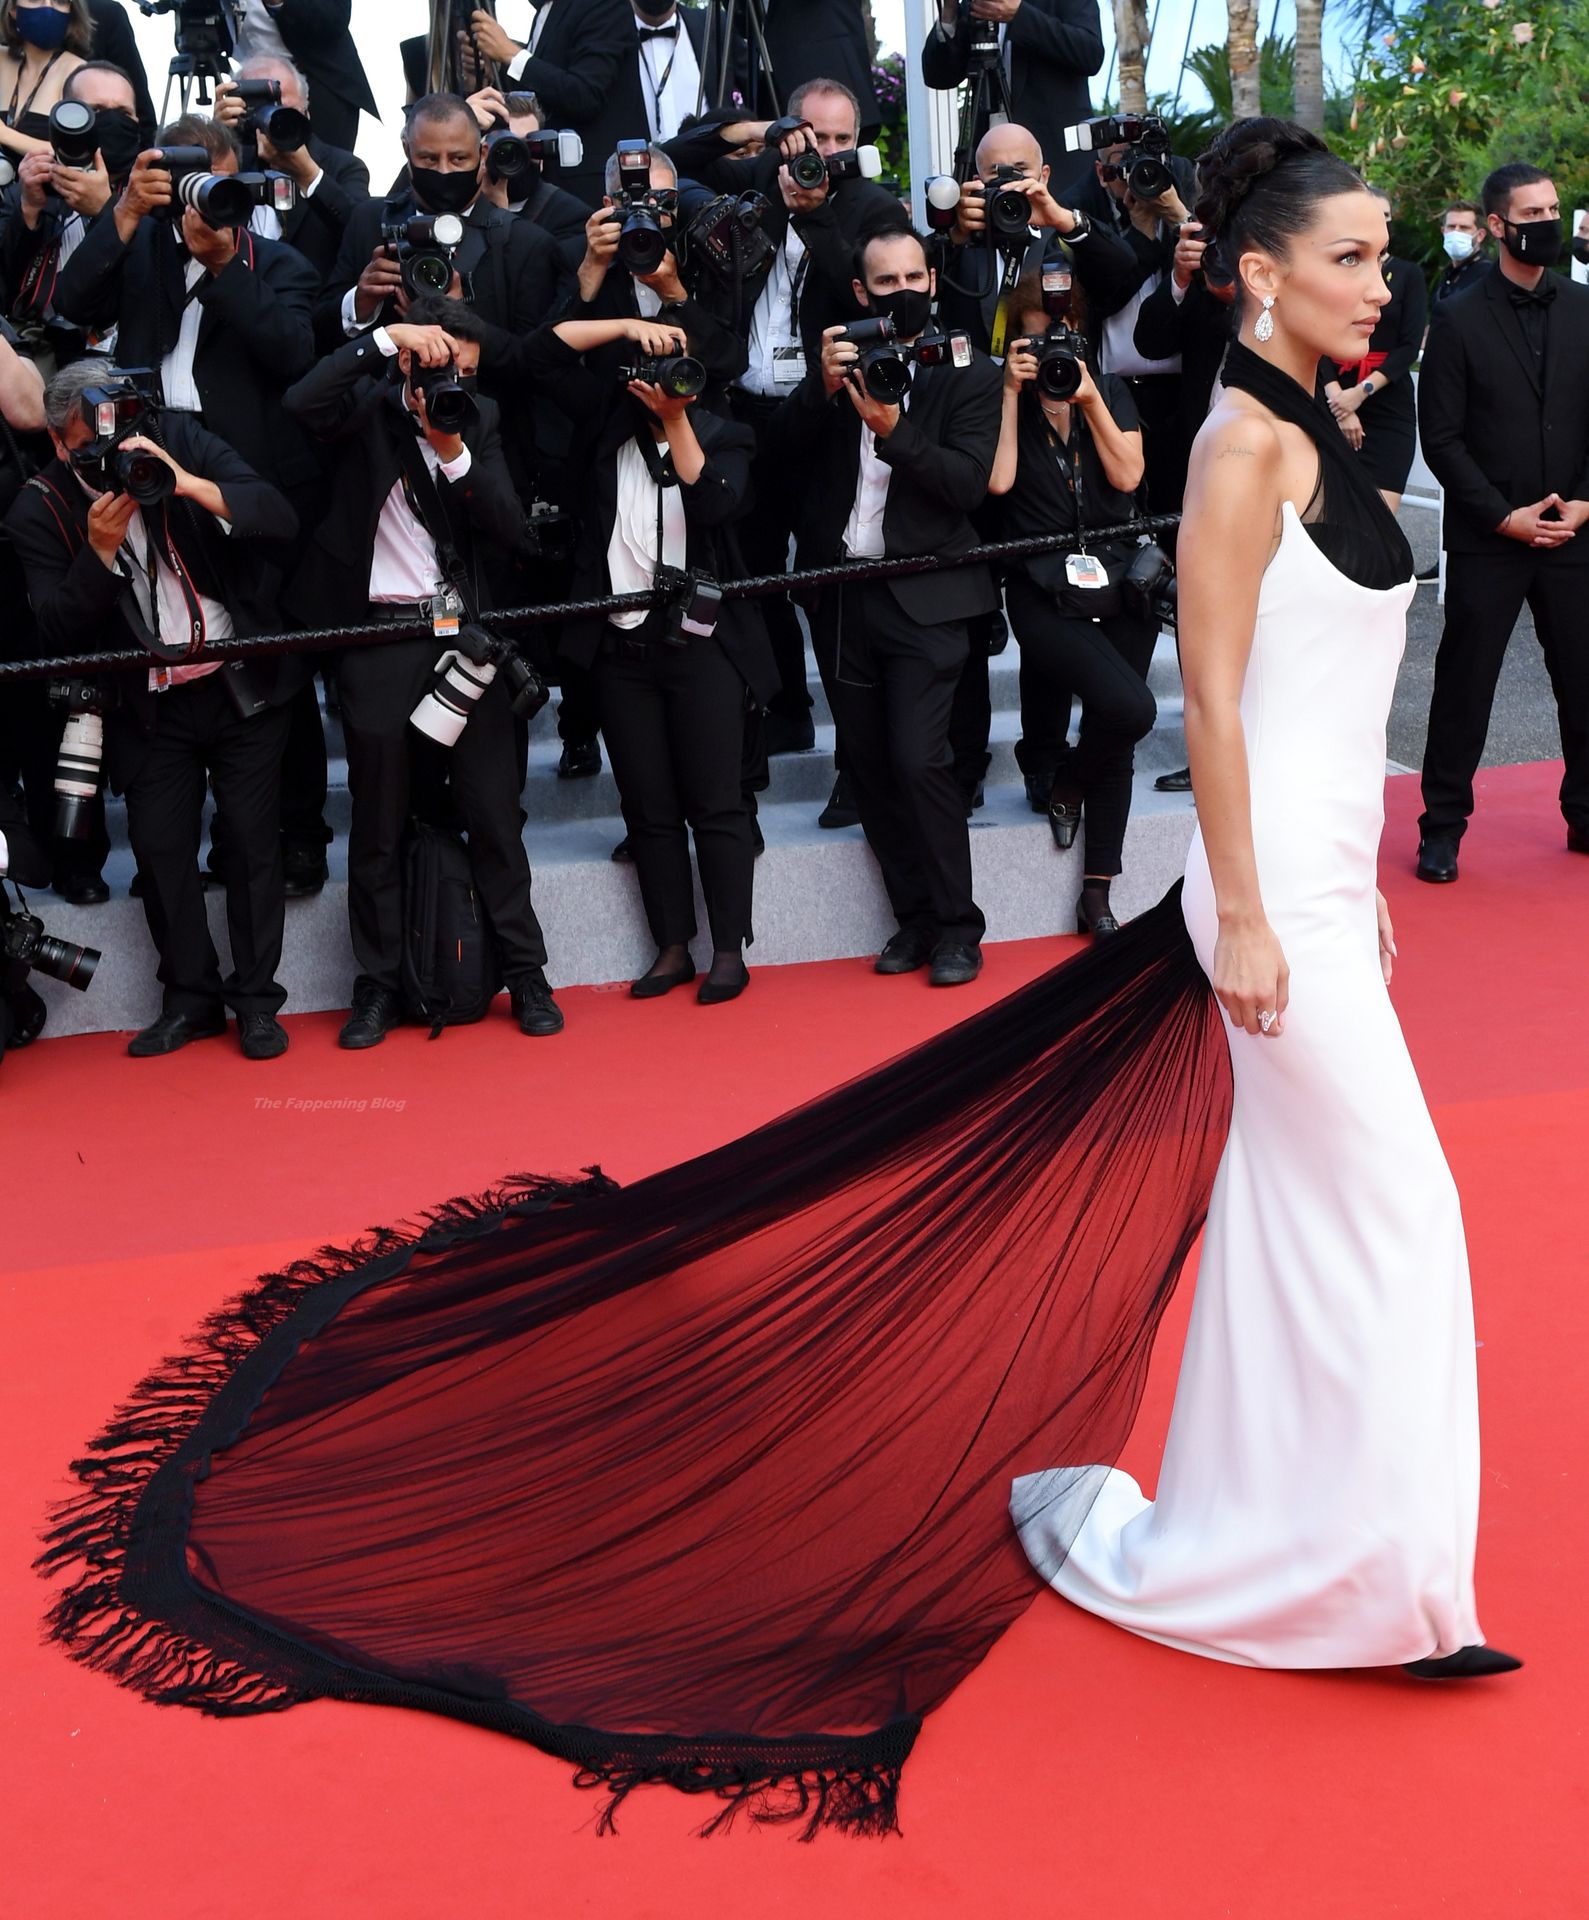 Bella Hadid Poses on the Red Carpet a
t the 74th Annual Cannes Film Festival (152 Photos)